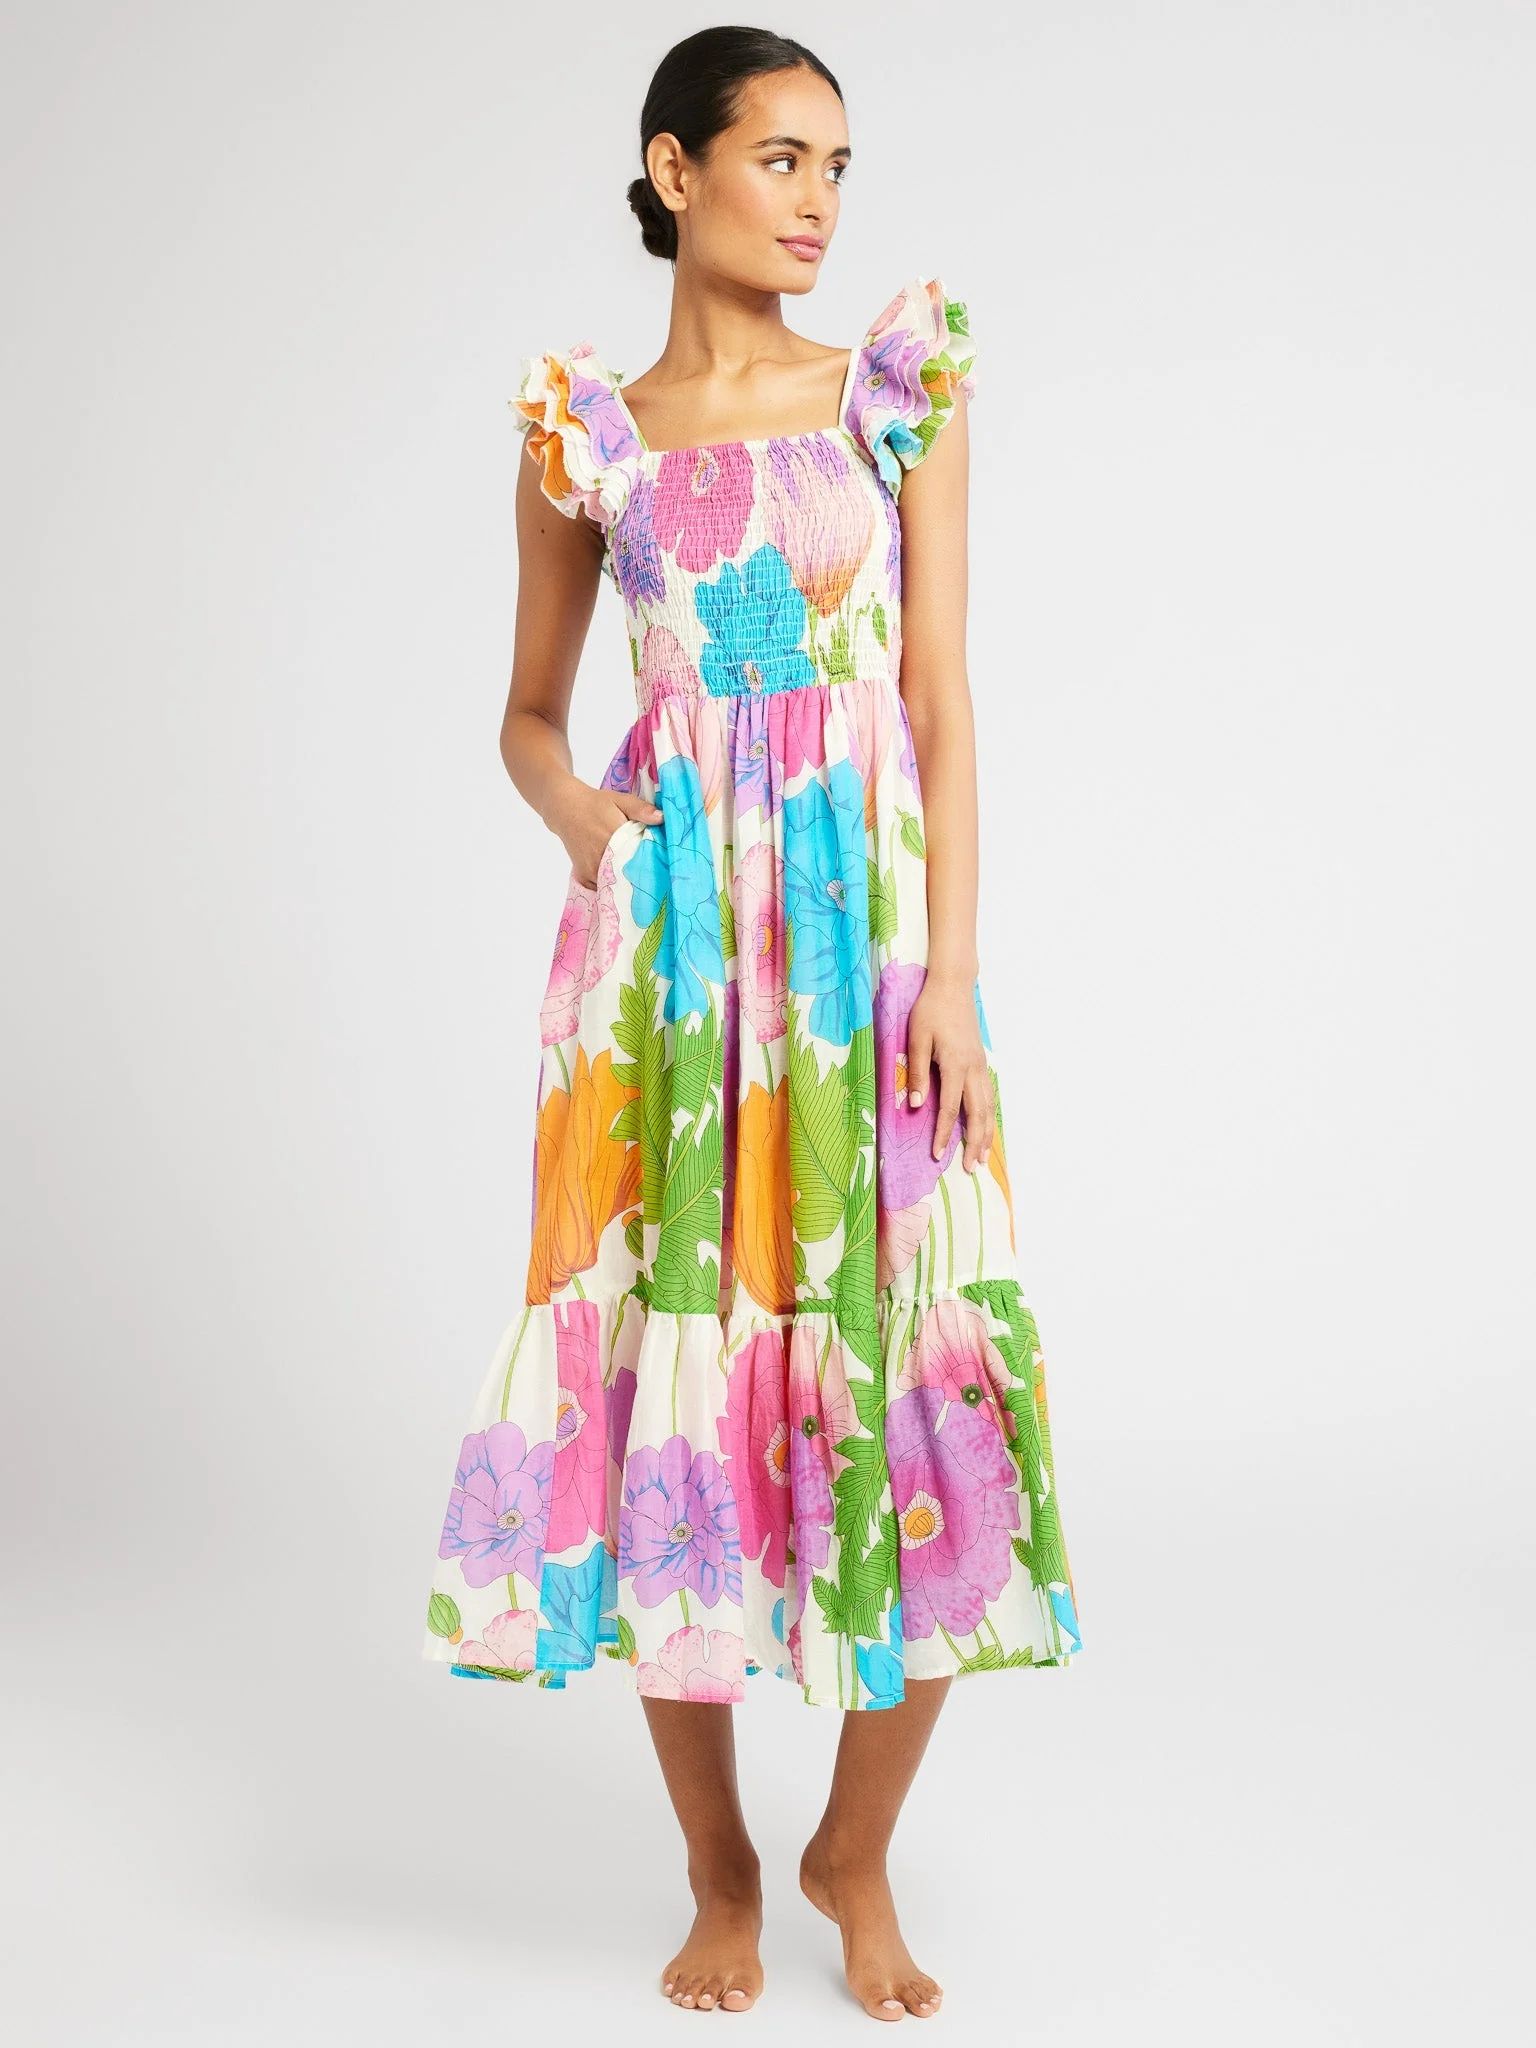 Shop Mille - Olympia Dress in Sedgwick | Mille